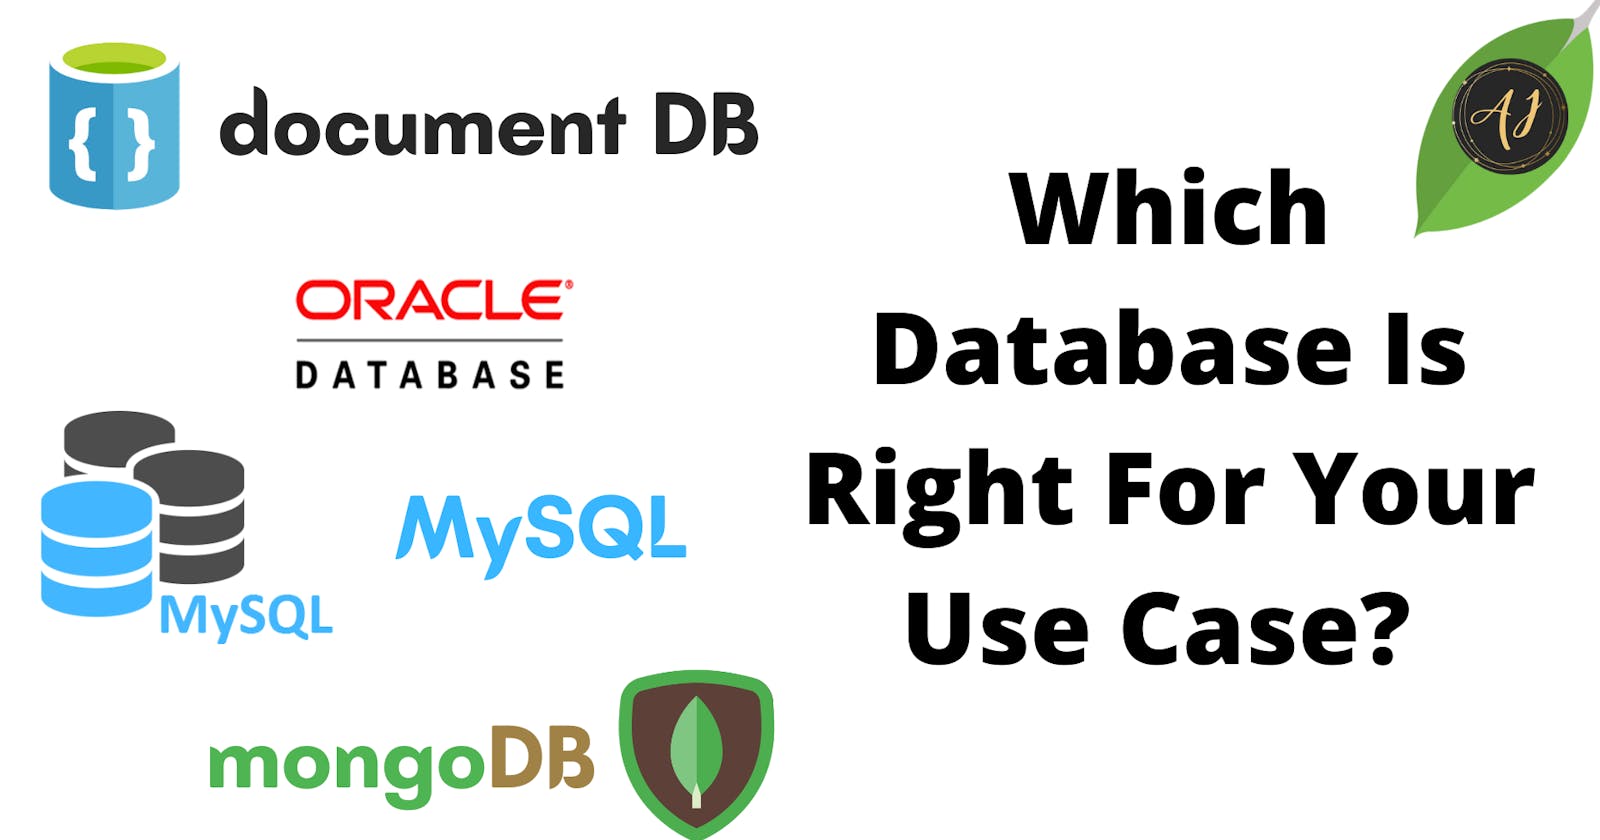 Which Database Is Right For Your Use Case?